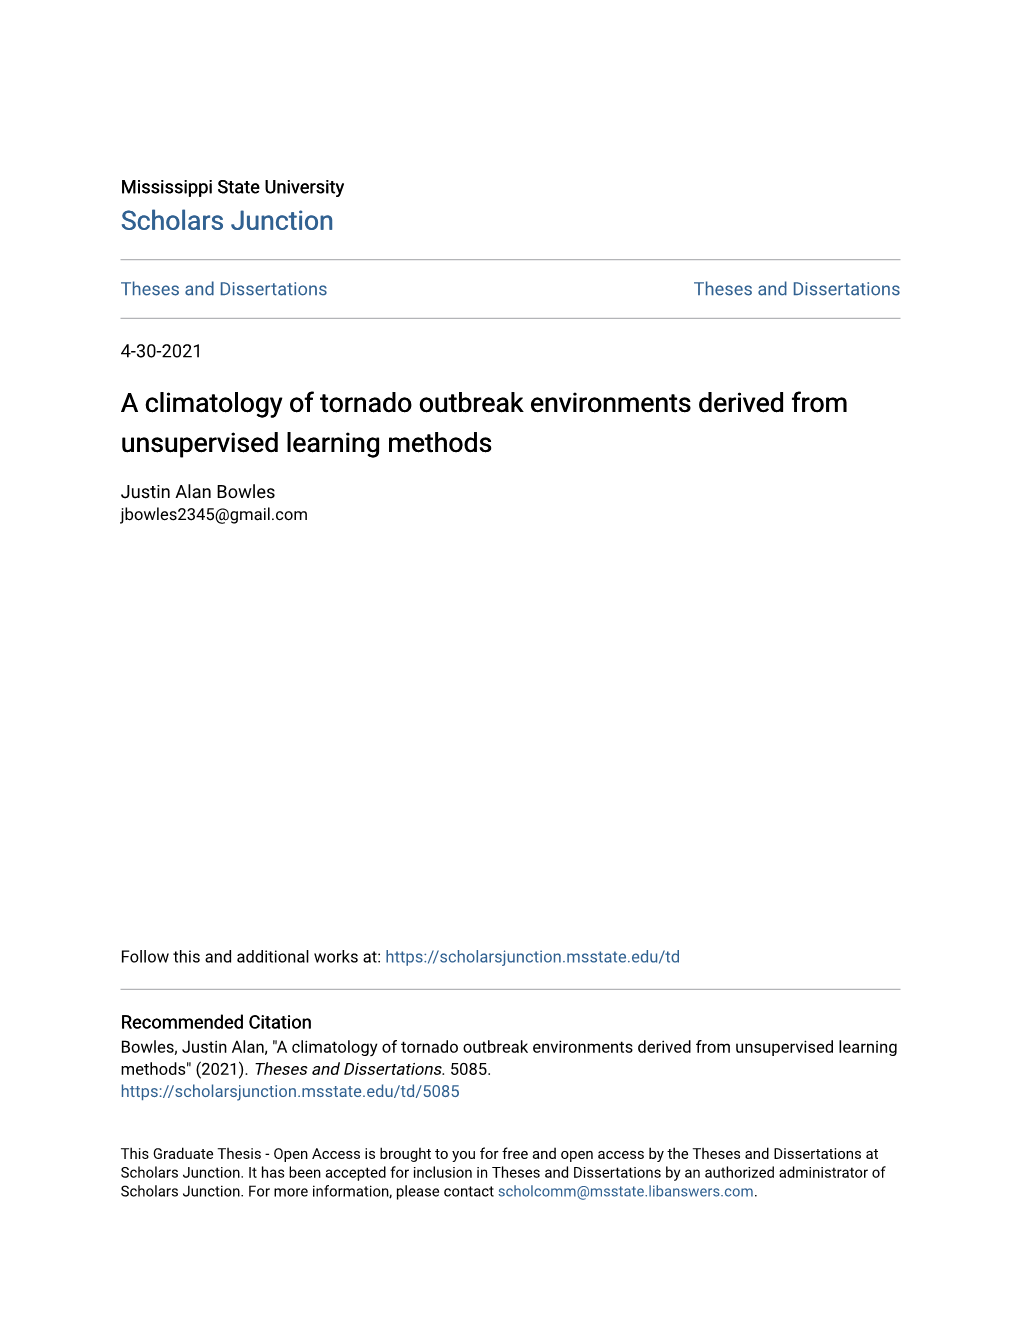 A Climatology of Tornado Outbreak Environments Derived from Unsupervised Learning Methods